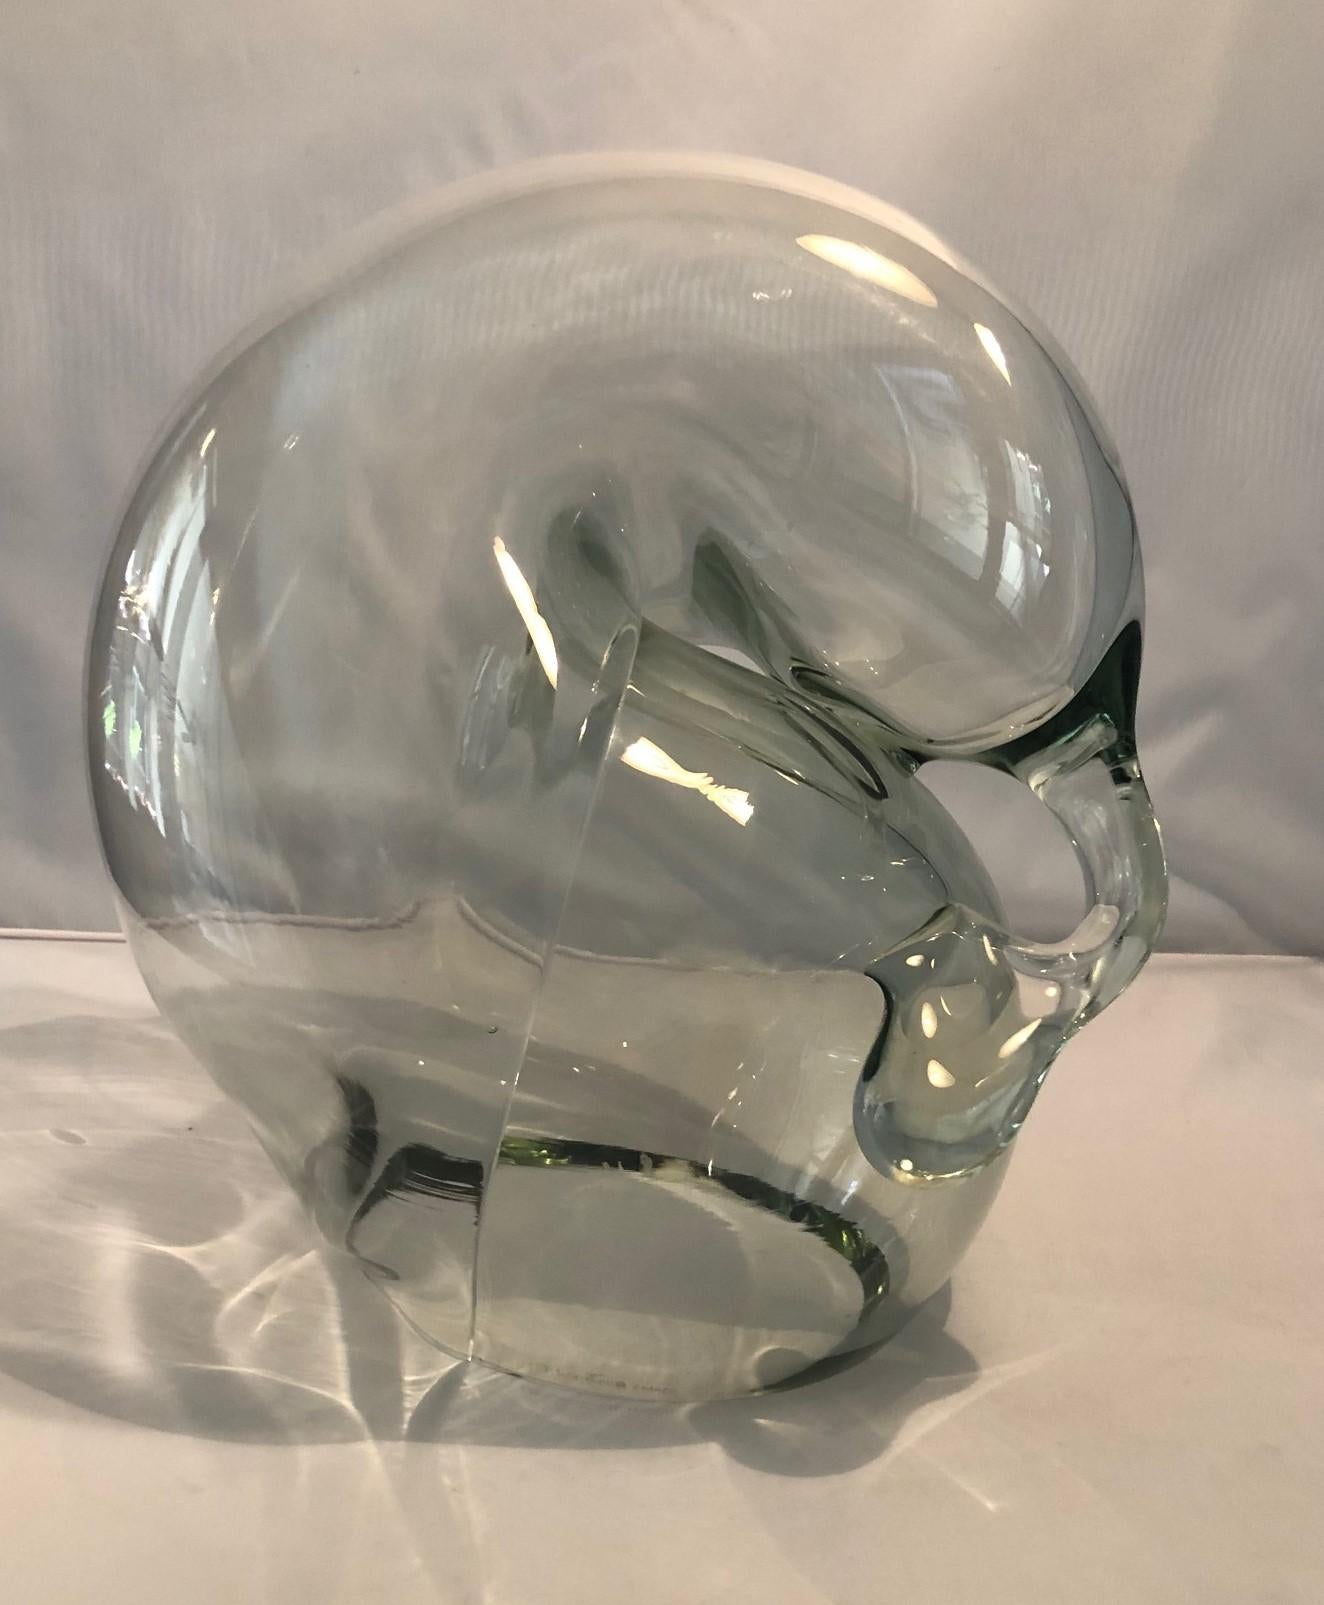 Large clear art glass orb sculpture by John Bingham, circa 1980s. This hand blown glass orb sculpture has a biomorphic free form design and is in very good condition with no chips or cracks. The piece is approximately 10